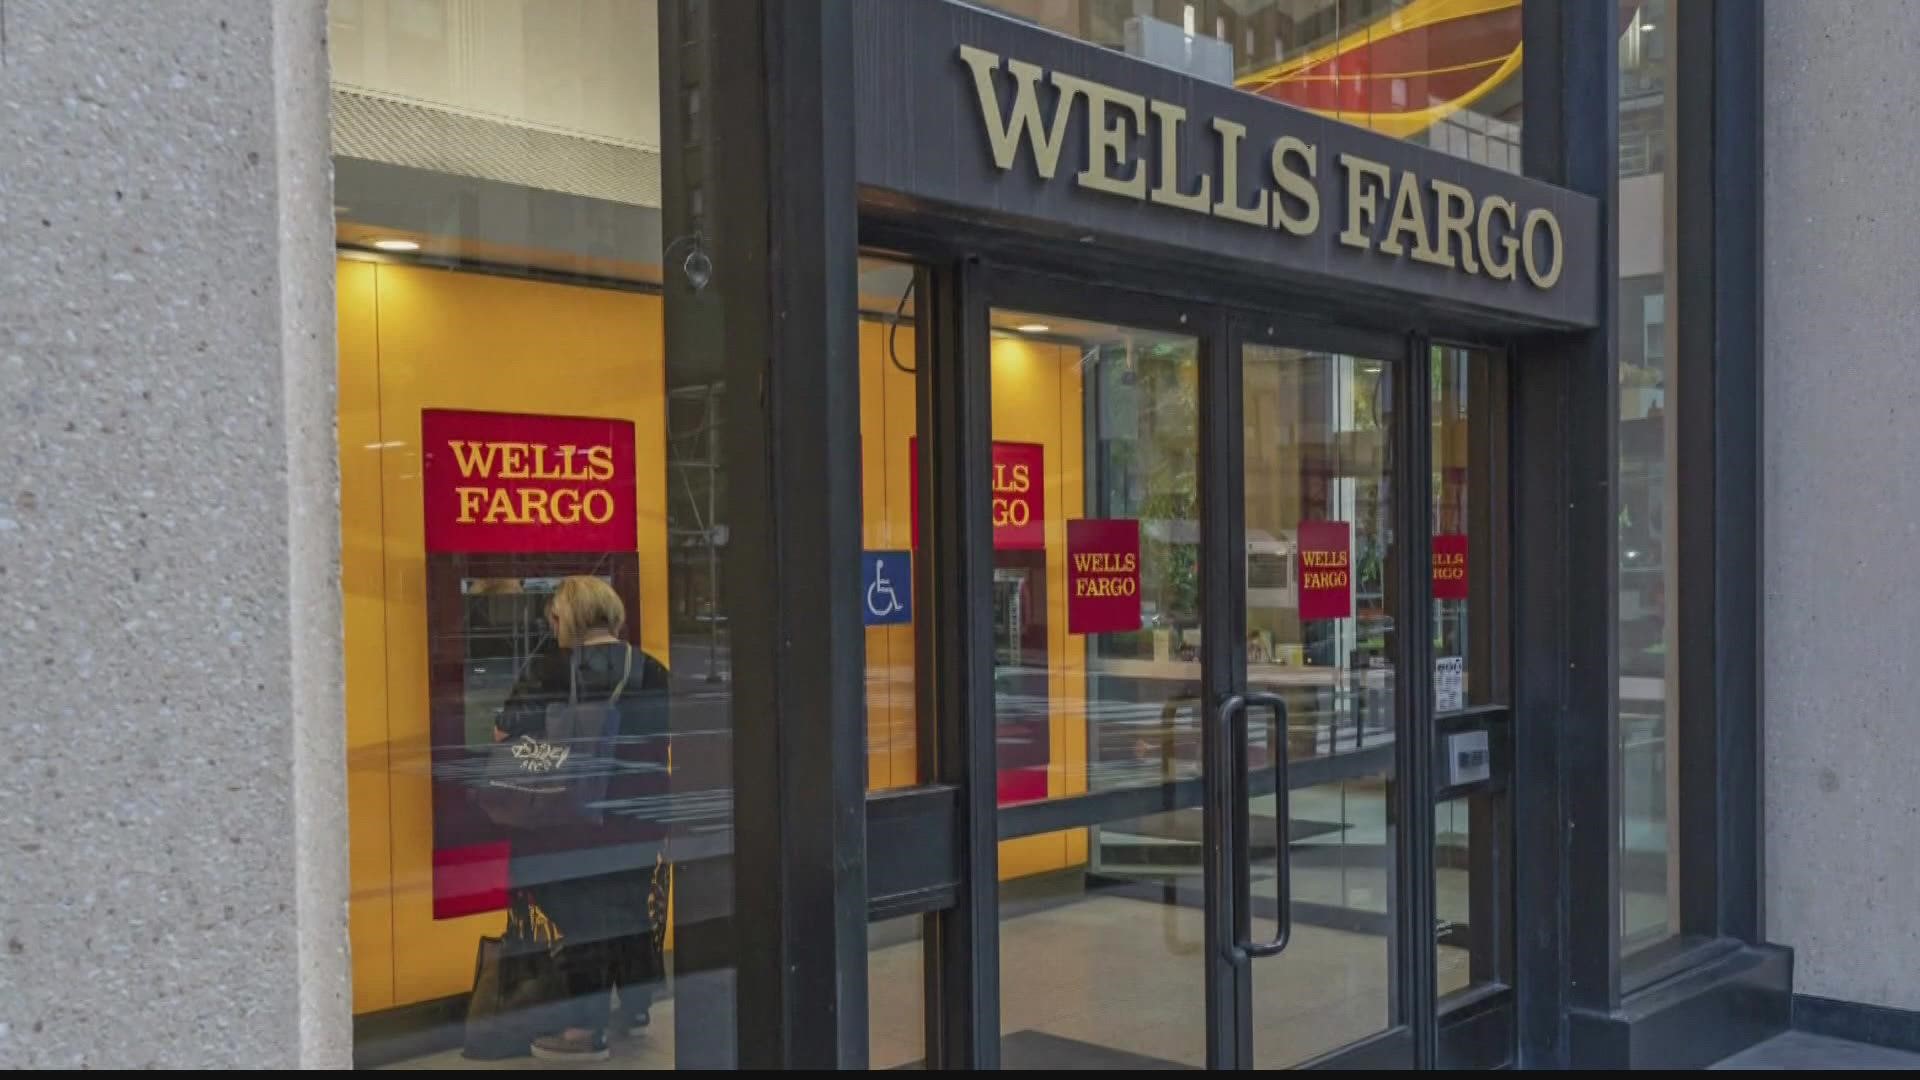 Wells Fargo called the allegations "unfounded."